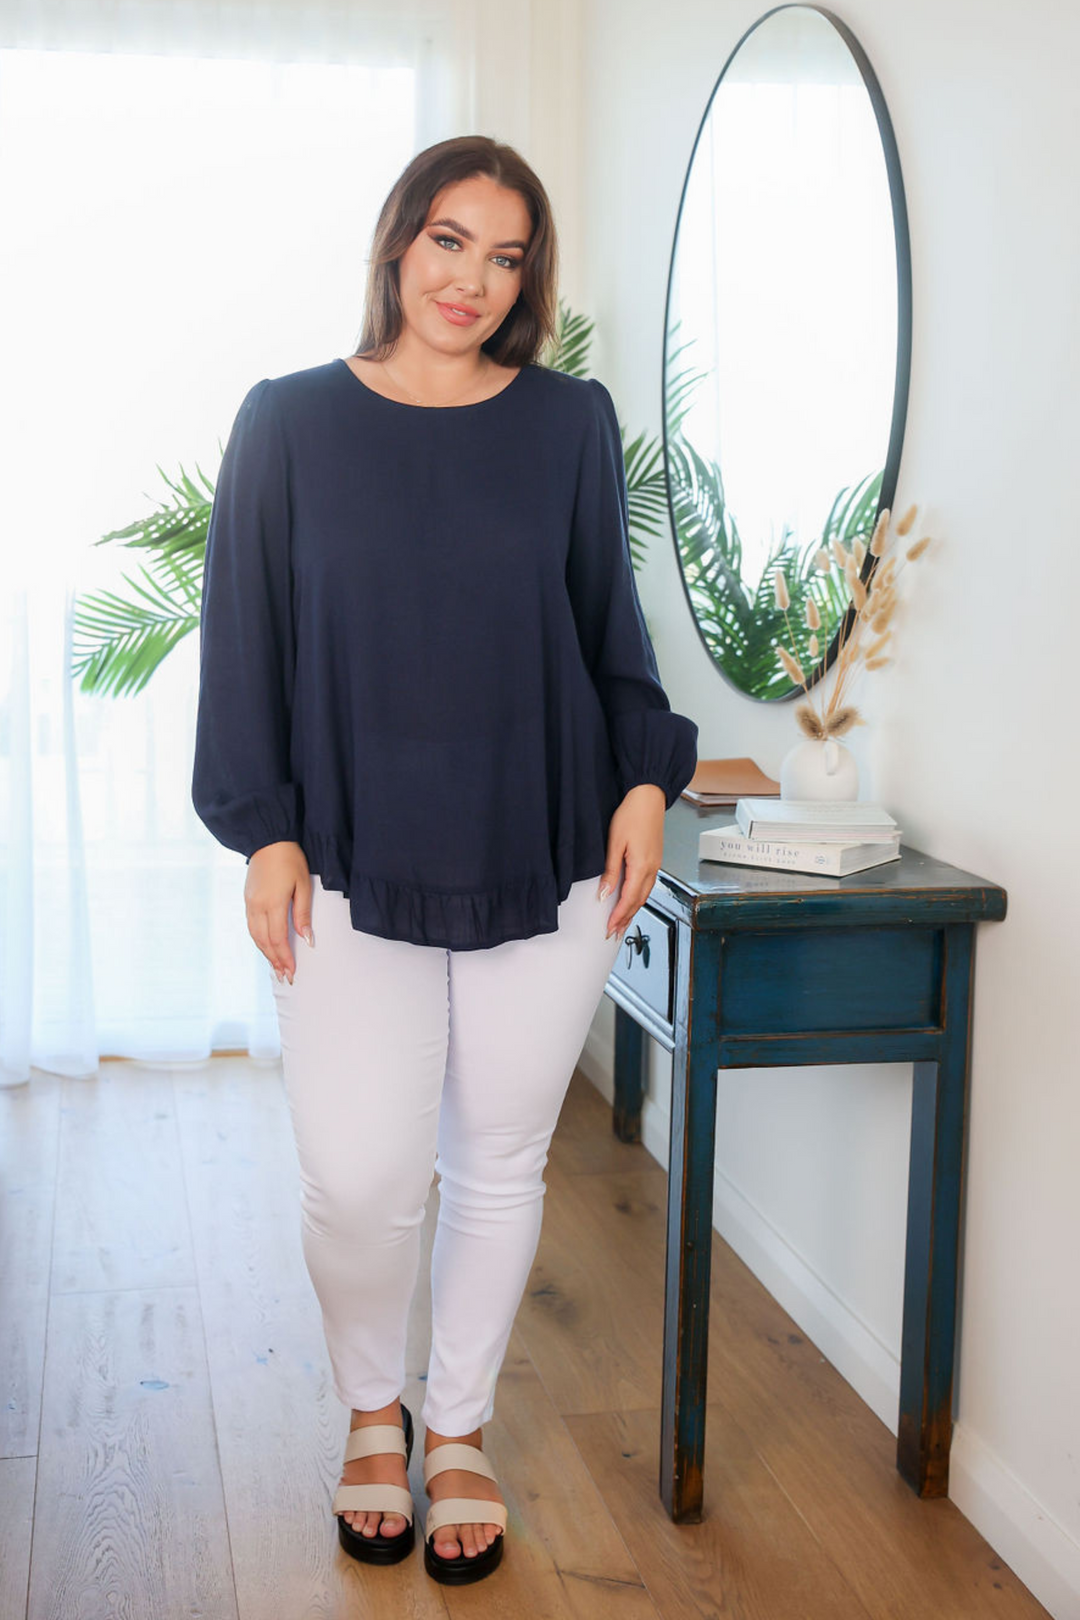 Ladies Long Sleeve Button Back Top - Round Neckline - Flowing Style - Navy - Sizes S/M - Xl/XXL - Mila Button Back Top Front Full Length View Paired with Delta White Jeans Daisy's Closet